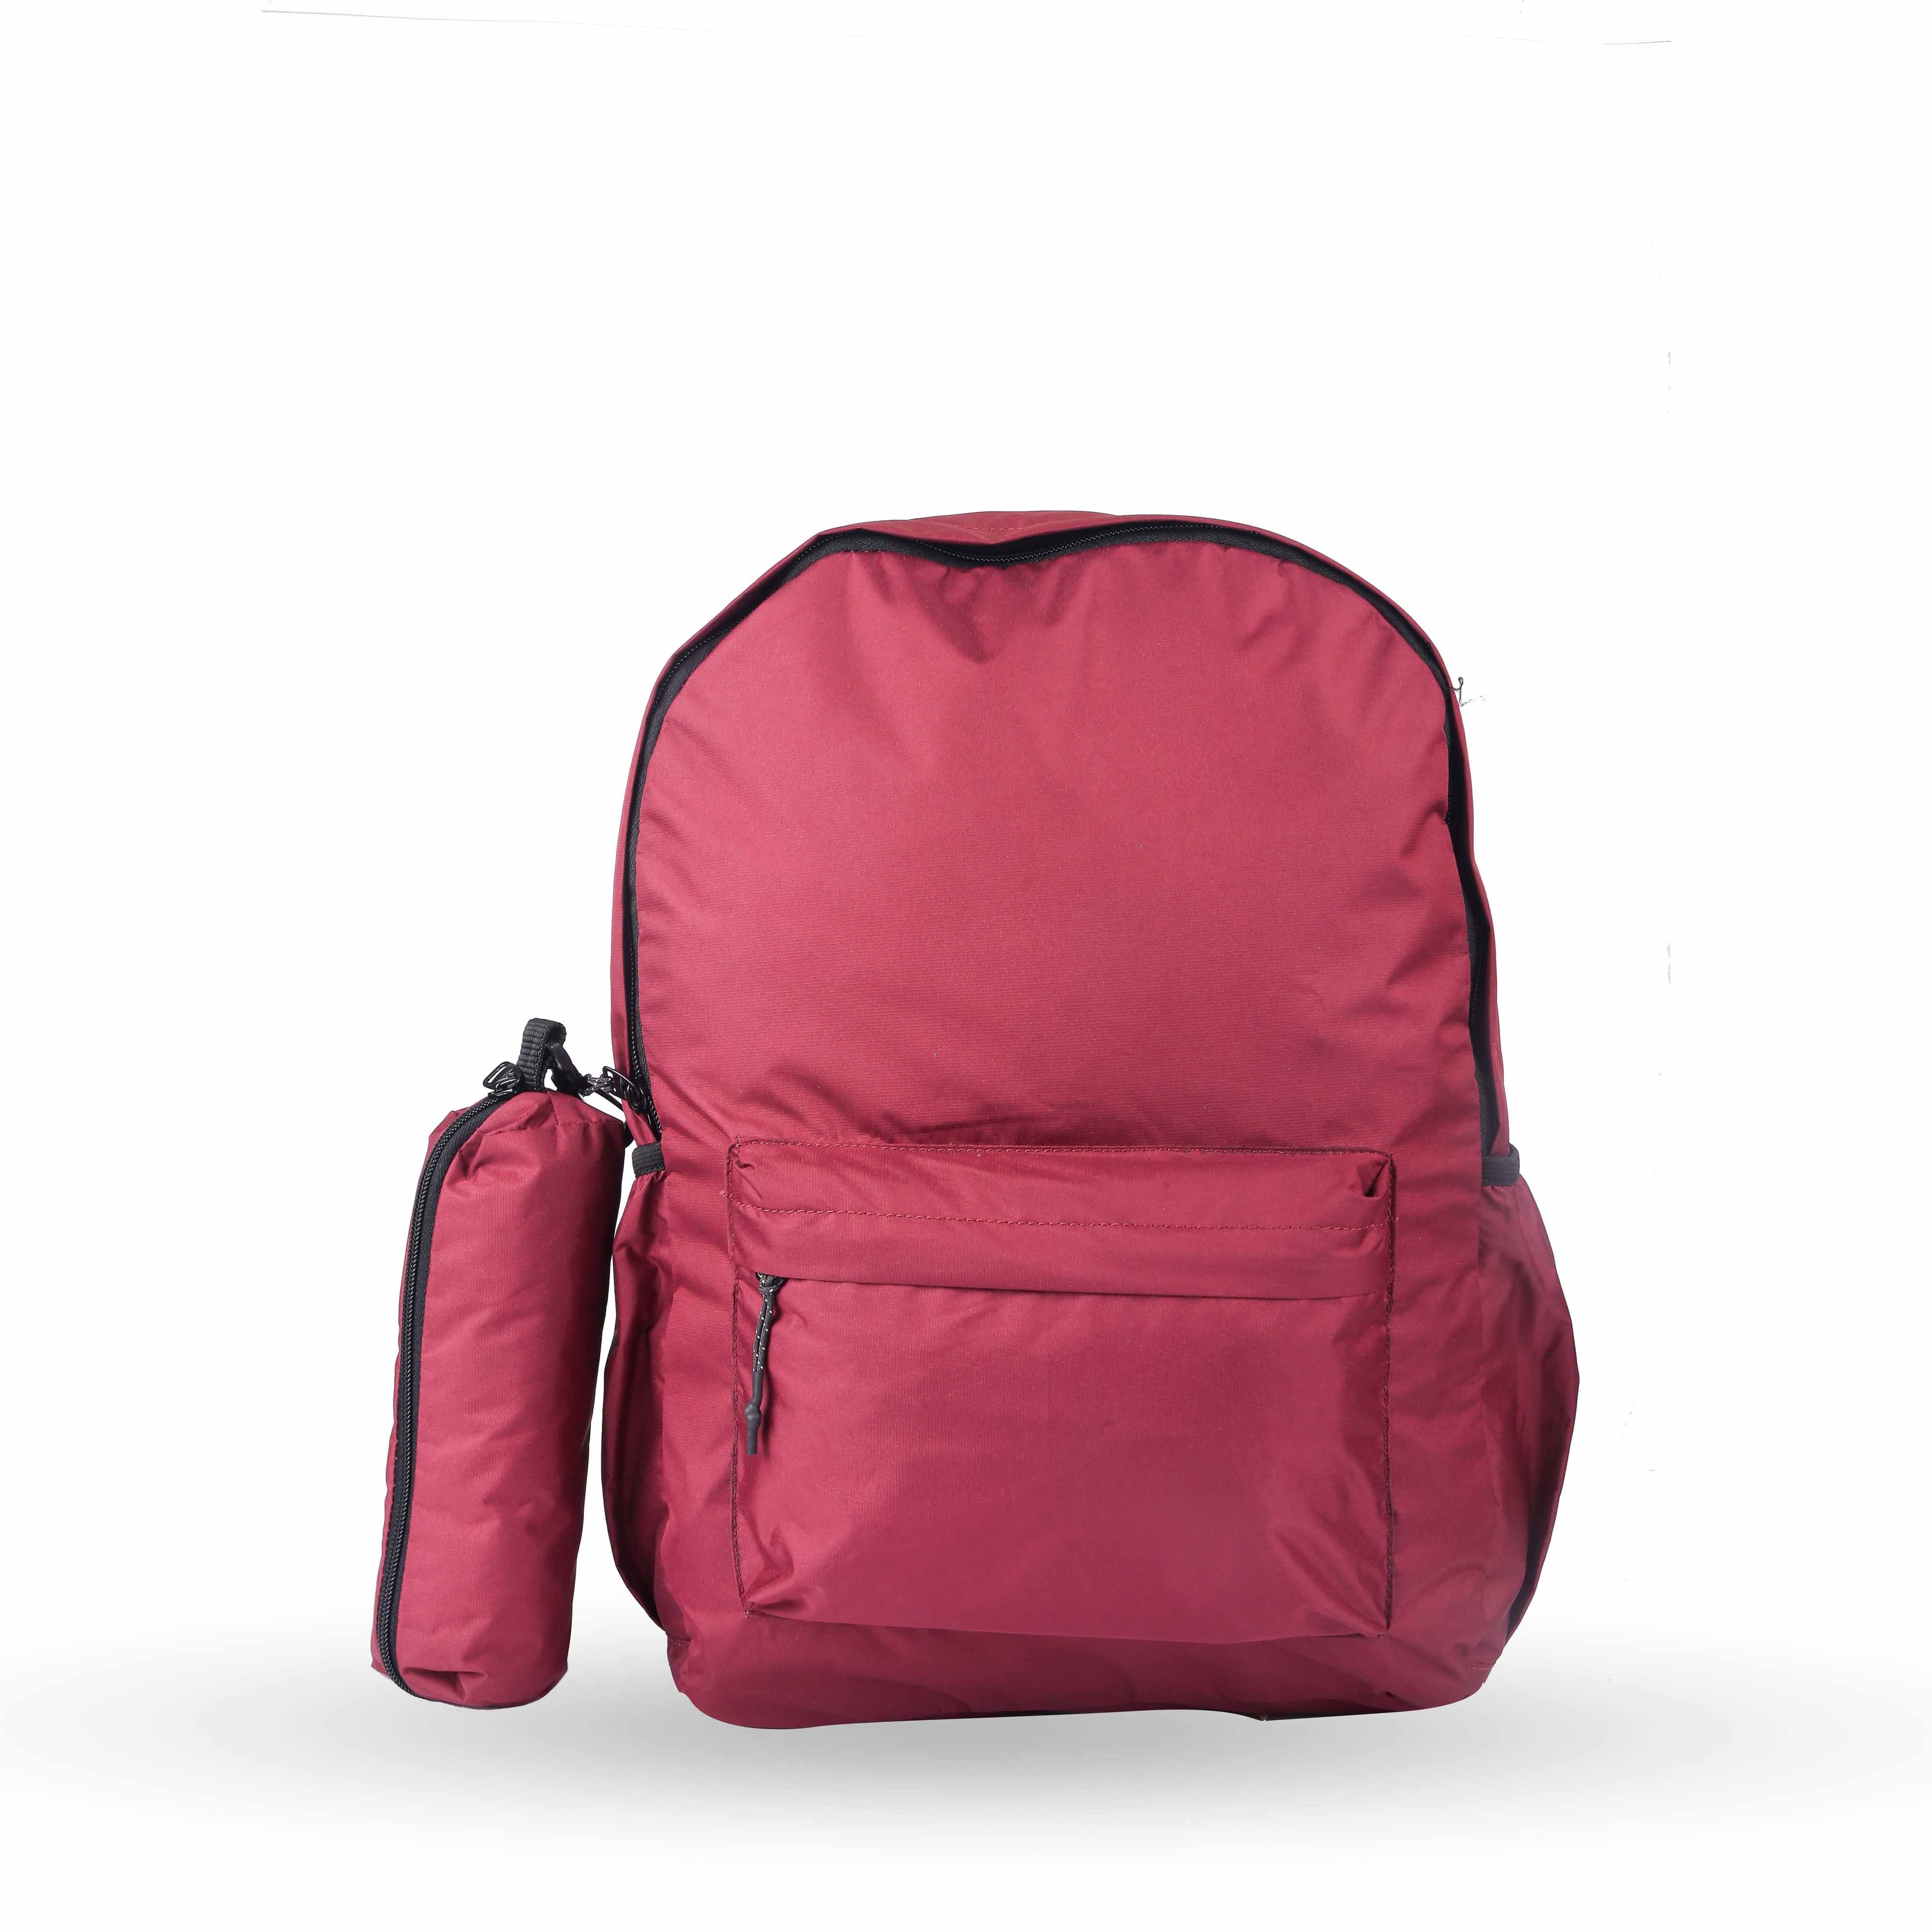 The Maroonster Backpack